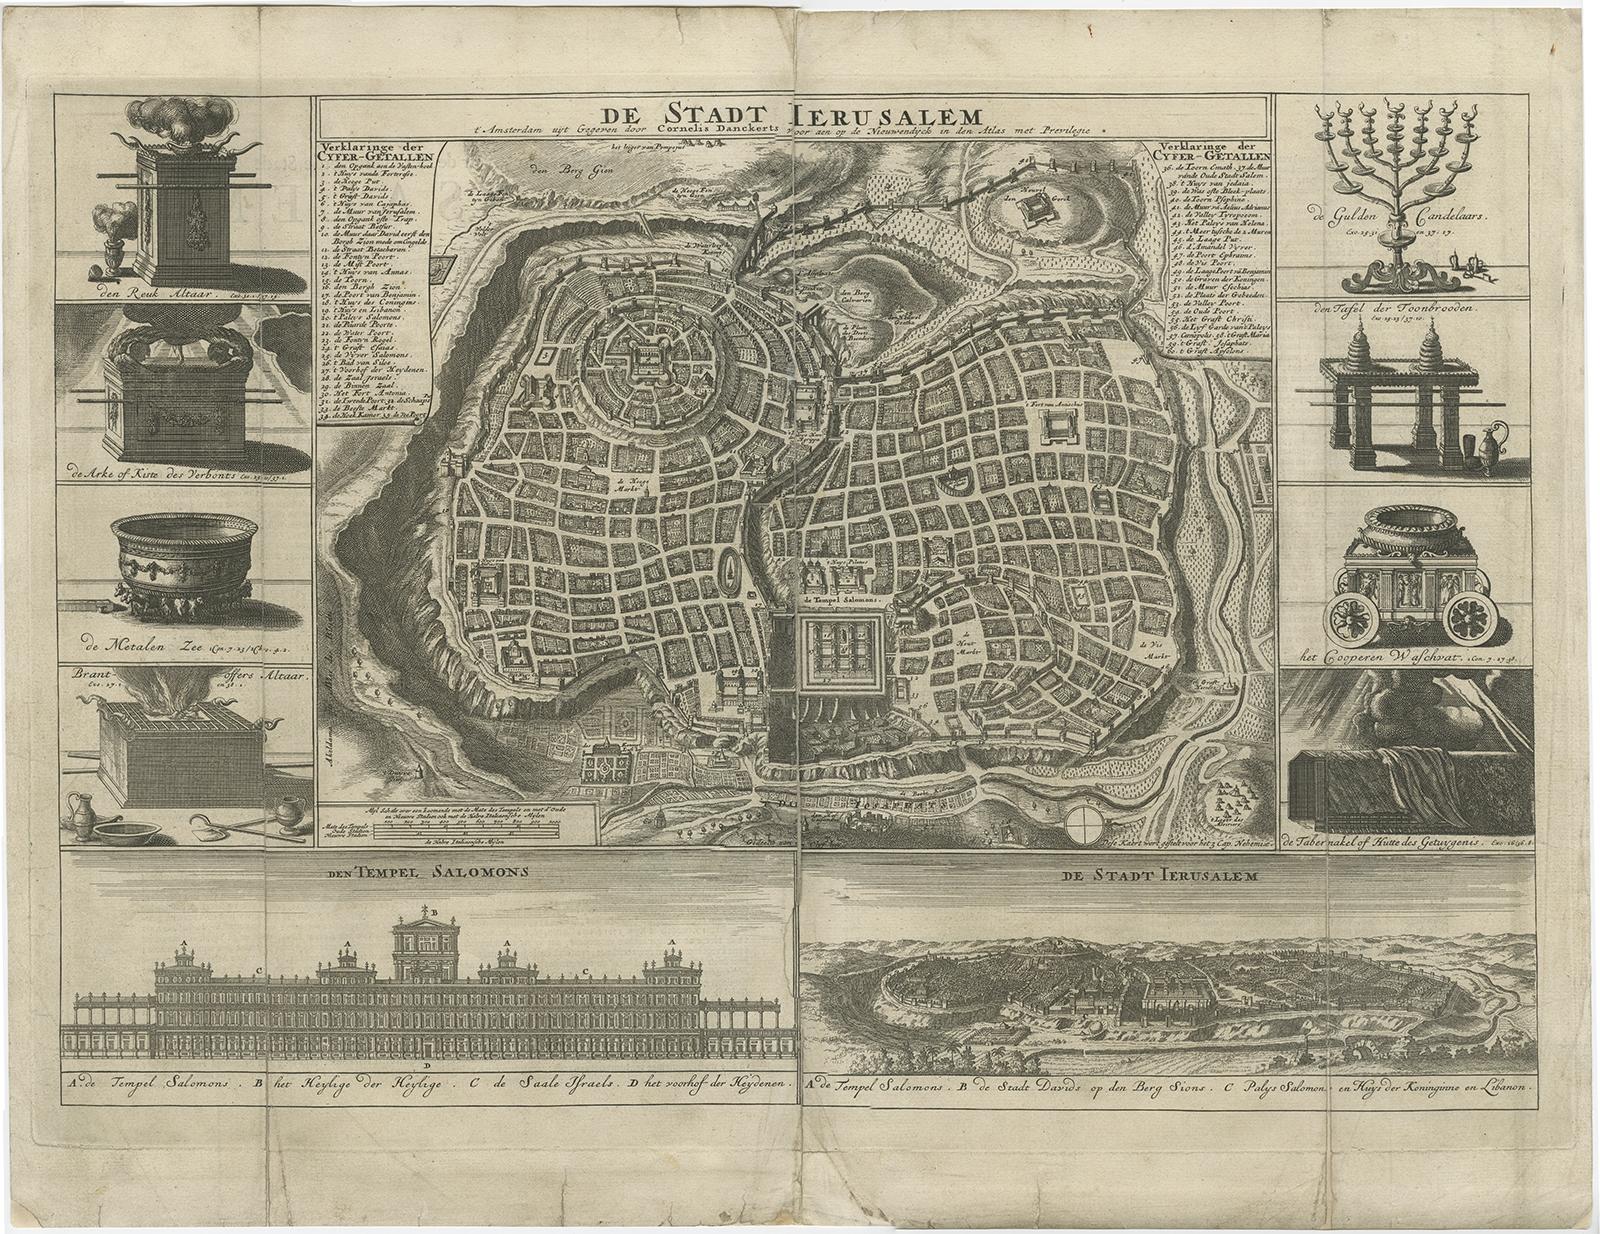 Antique map of the Holy City titled 'De Stadt Ierusalem'. 

Rare state of this bird's eye plan of the holy city flanked by engravings of religious icons. At the bottom are an elevation of the Temple of Solomon and a panoramic view of Jerusalem. The